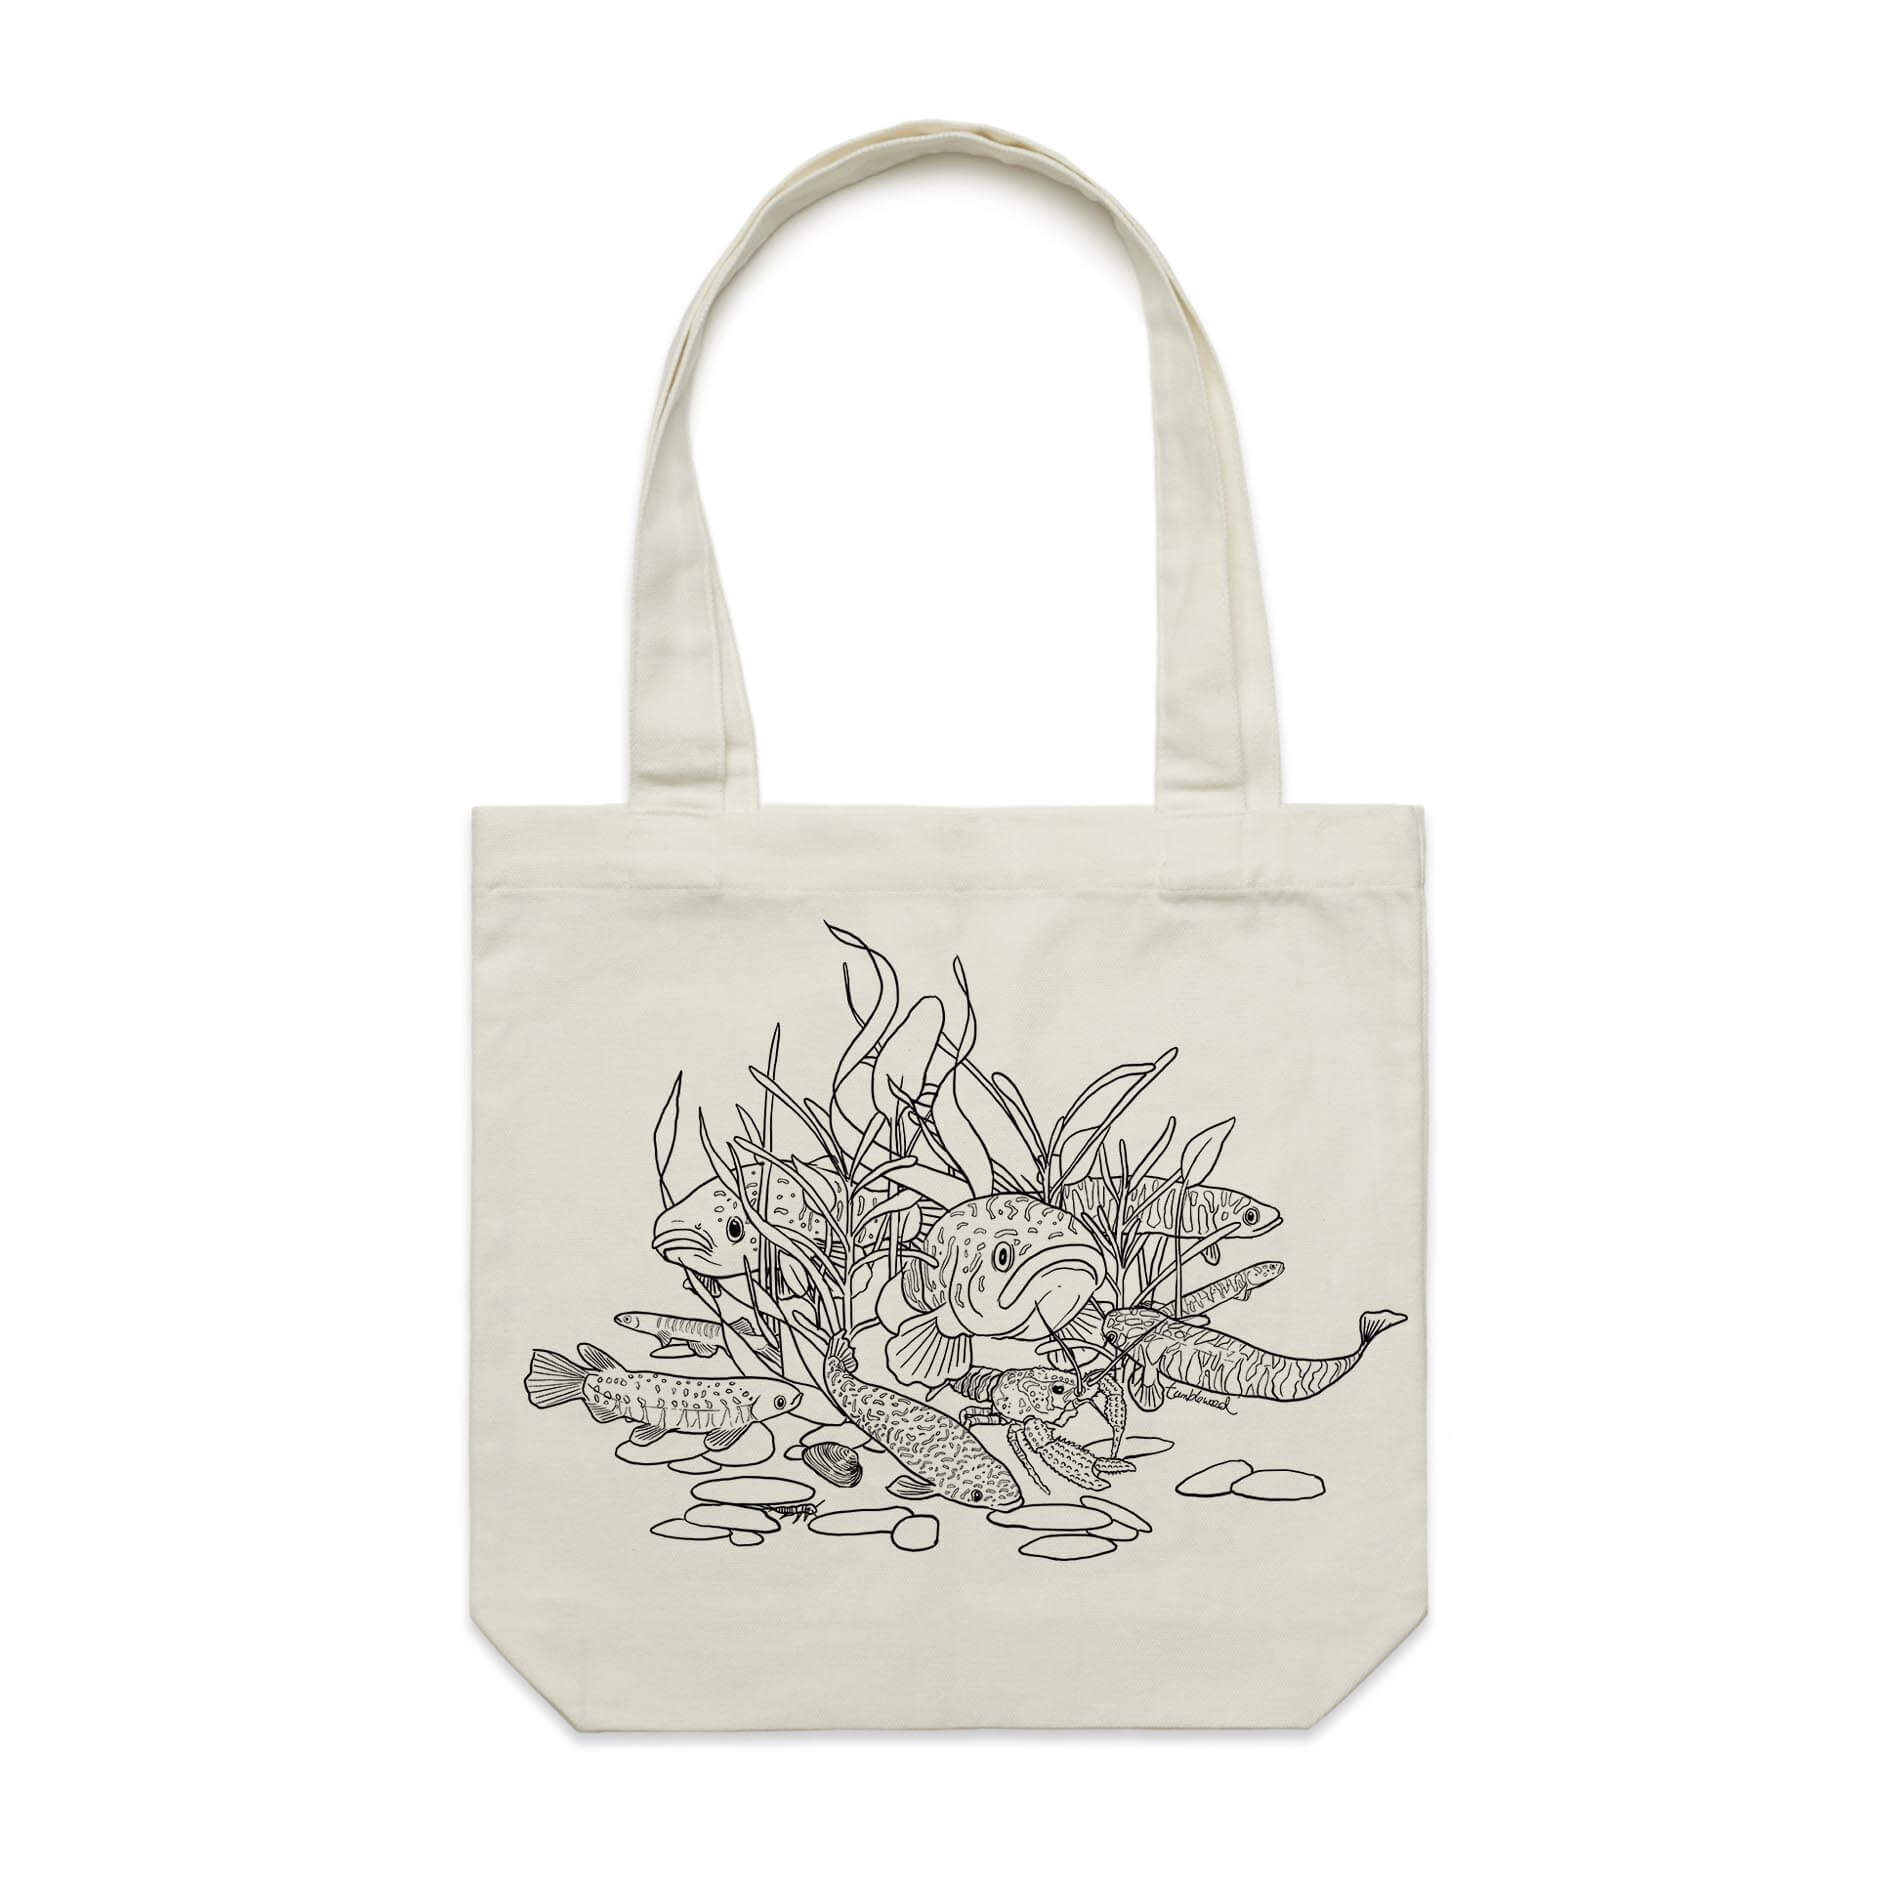 Cotton canvas tote bag with a screen printed Freshwater design.